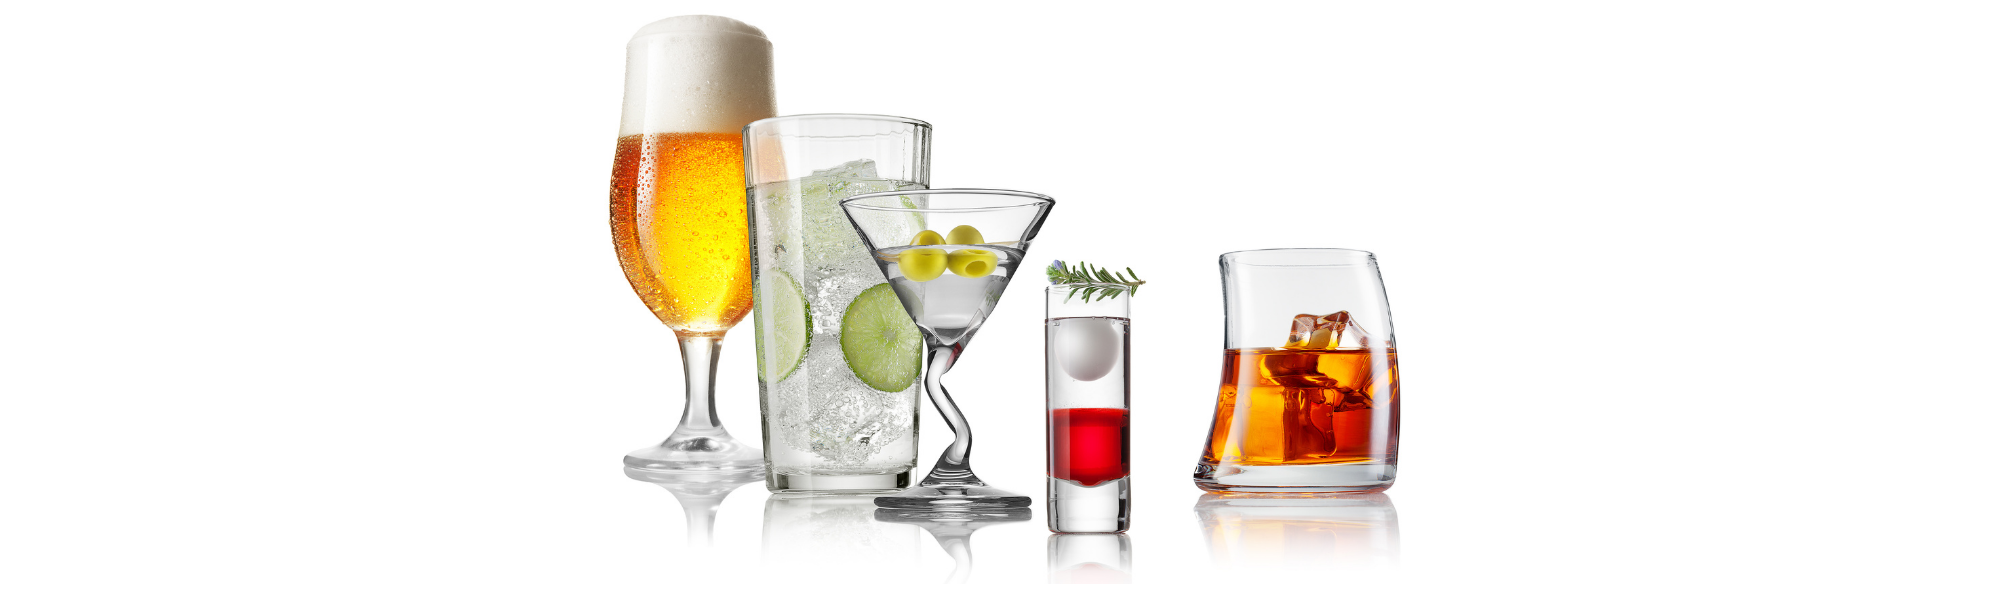 variety of alcoholic beverages against a white background 